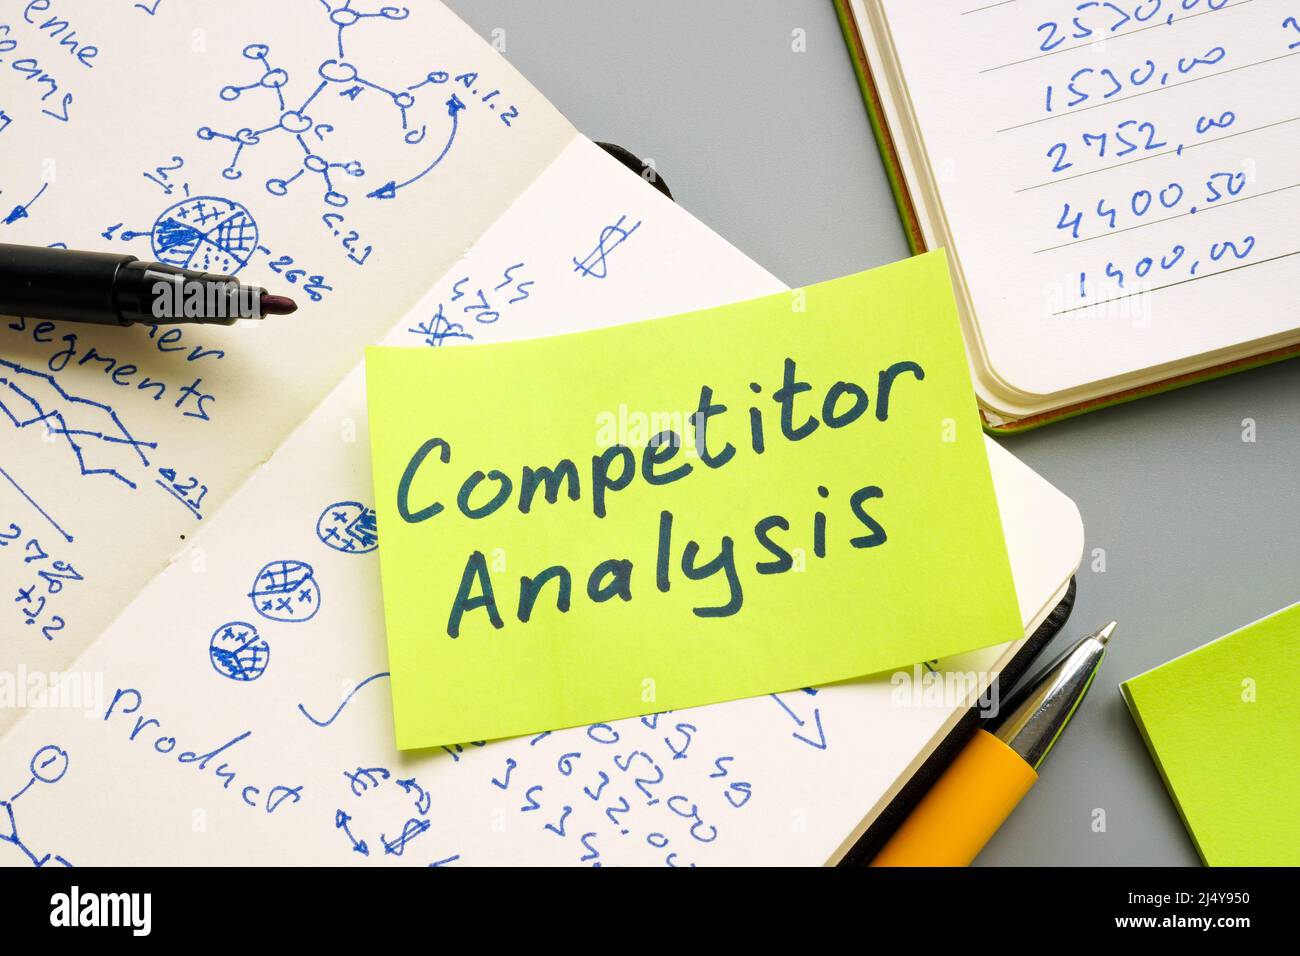 Competitor analysis inscription and handwritten data on the sheets. Stock Photo